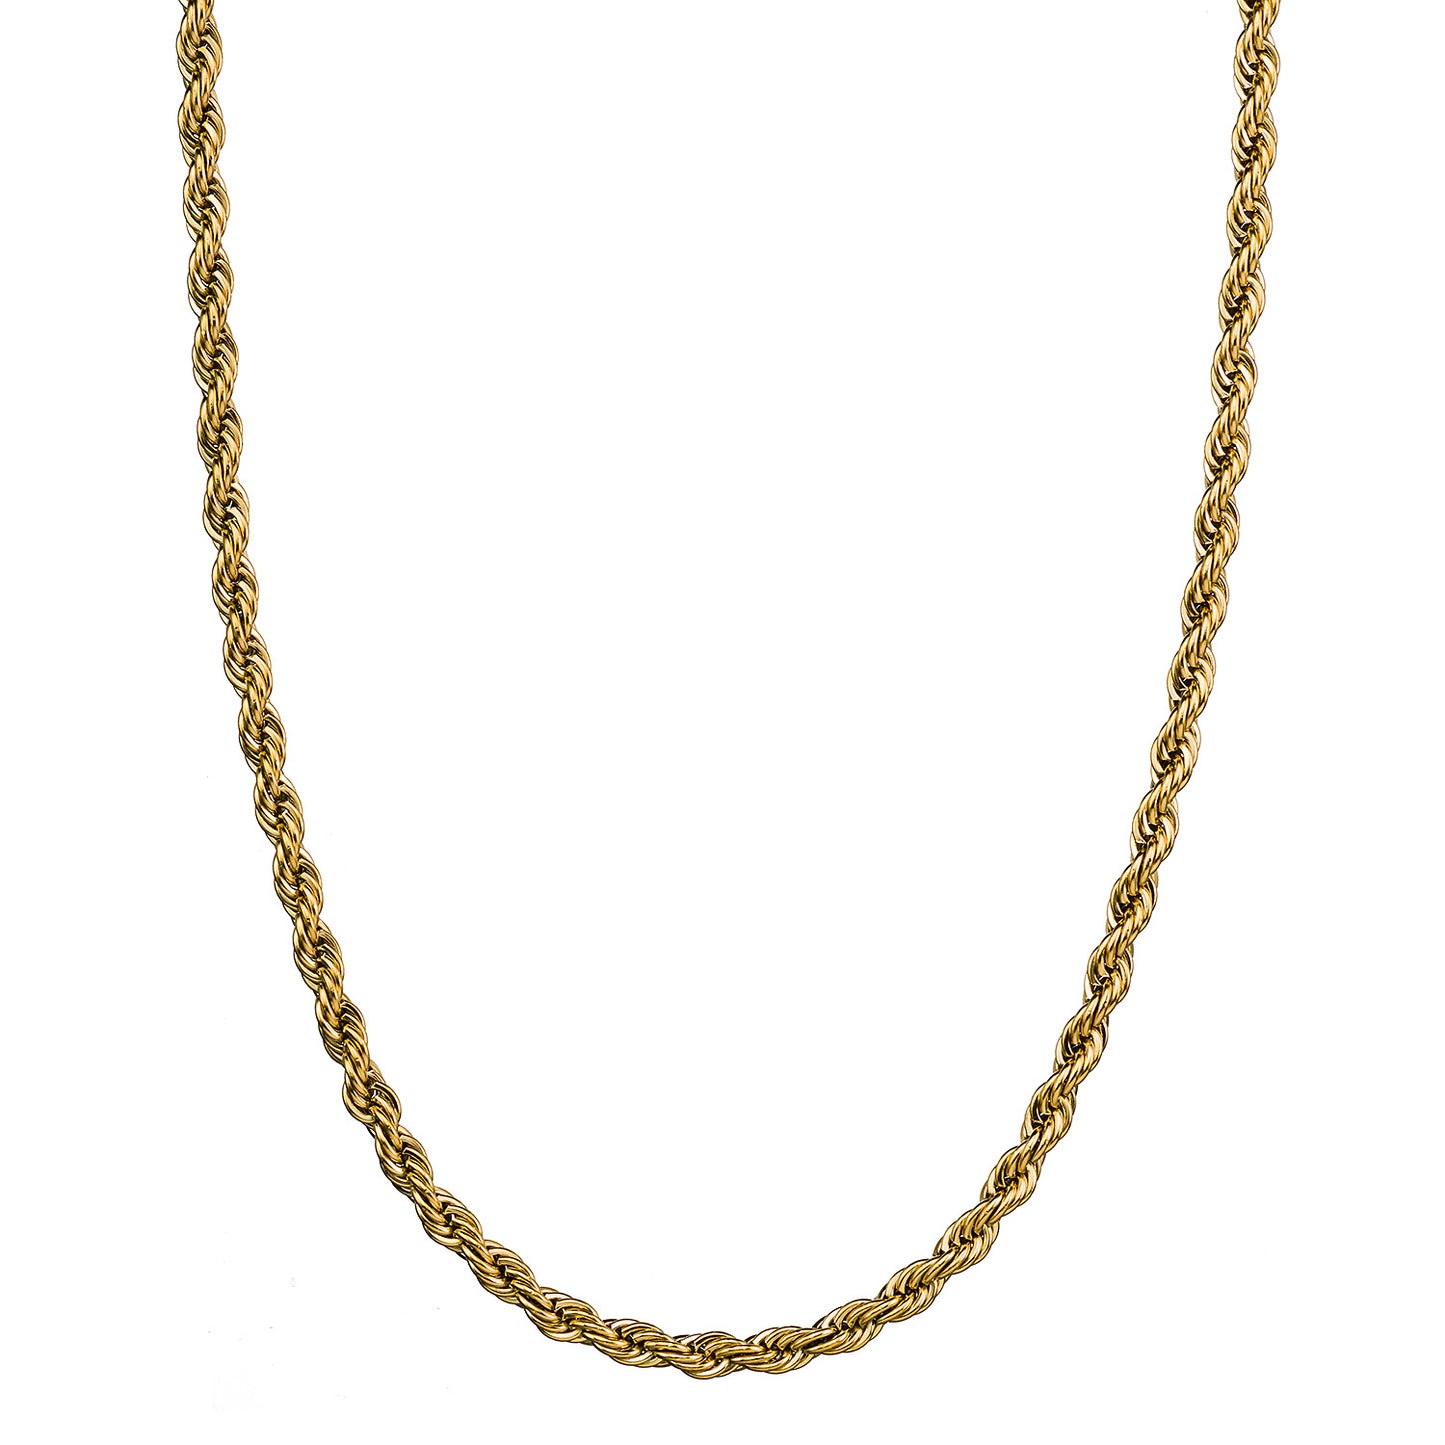 Chain Rope 5mm Gold